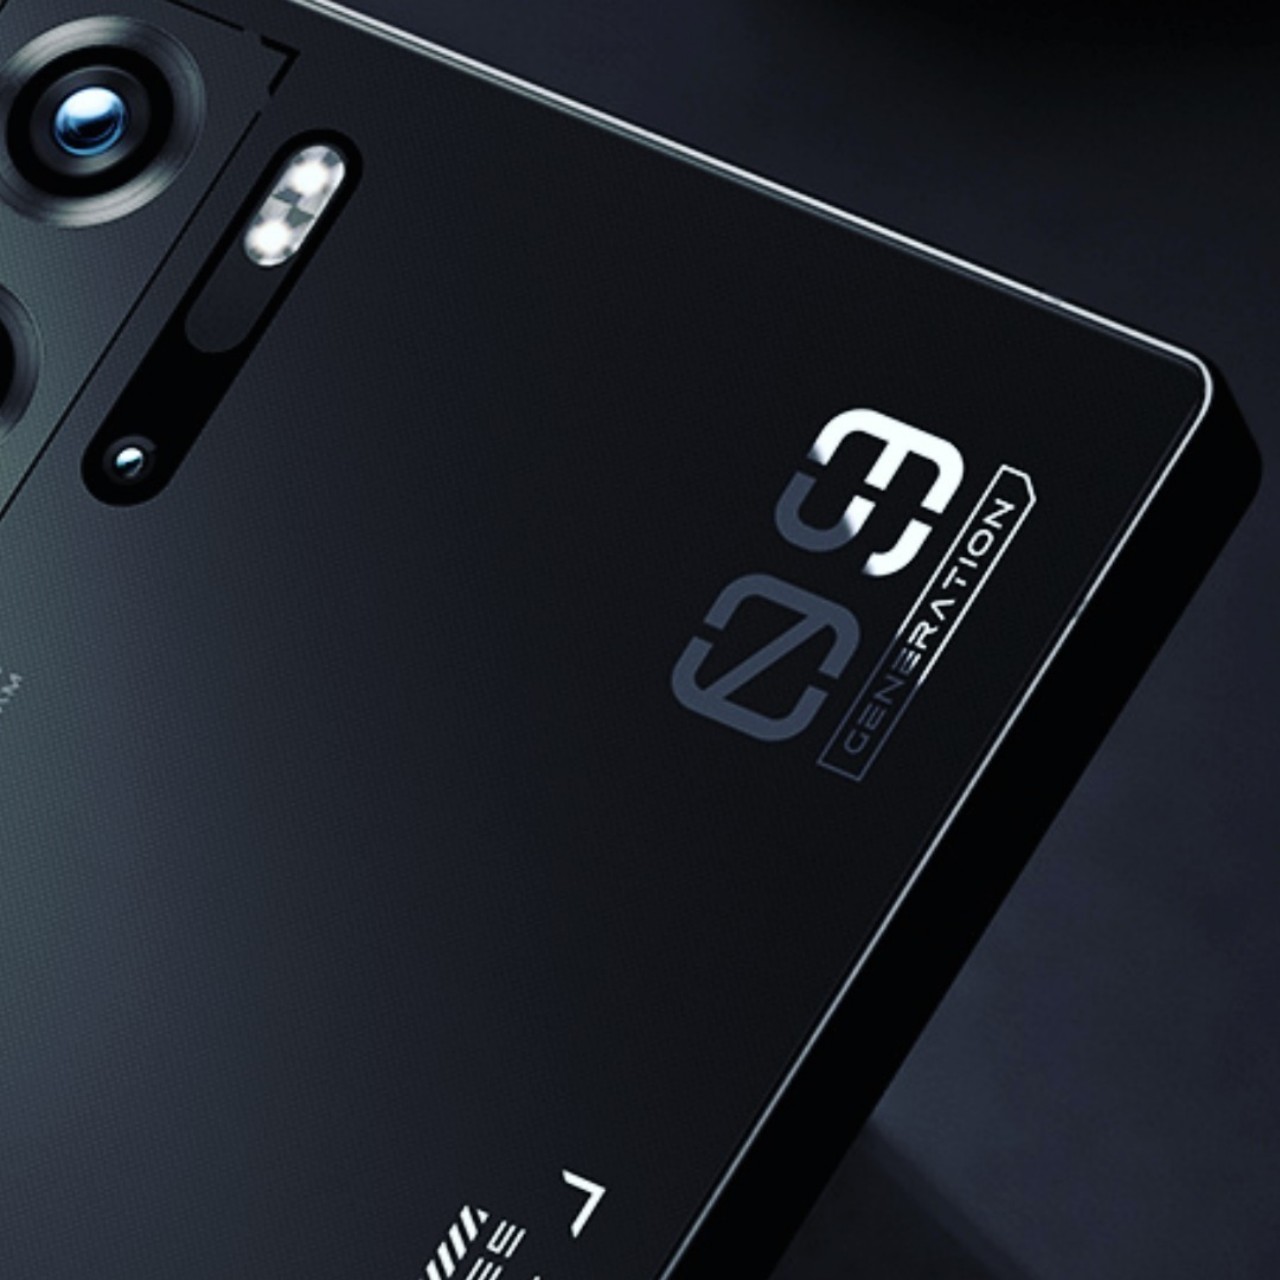 The Redmagic 9 Pro Finally Goes Global As One Of The Most Powerful Gaming  Smartphones Available In The Market